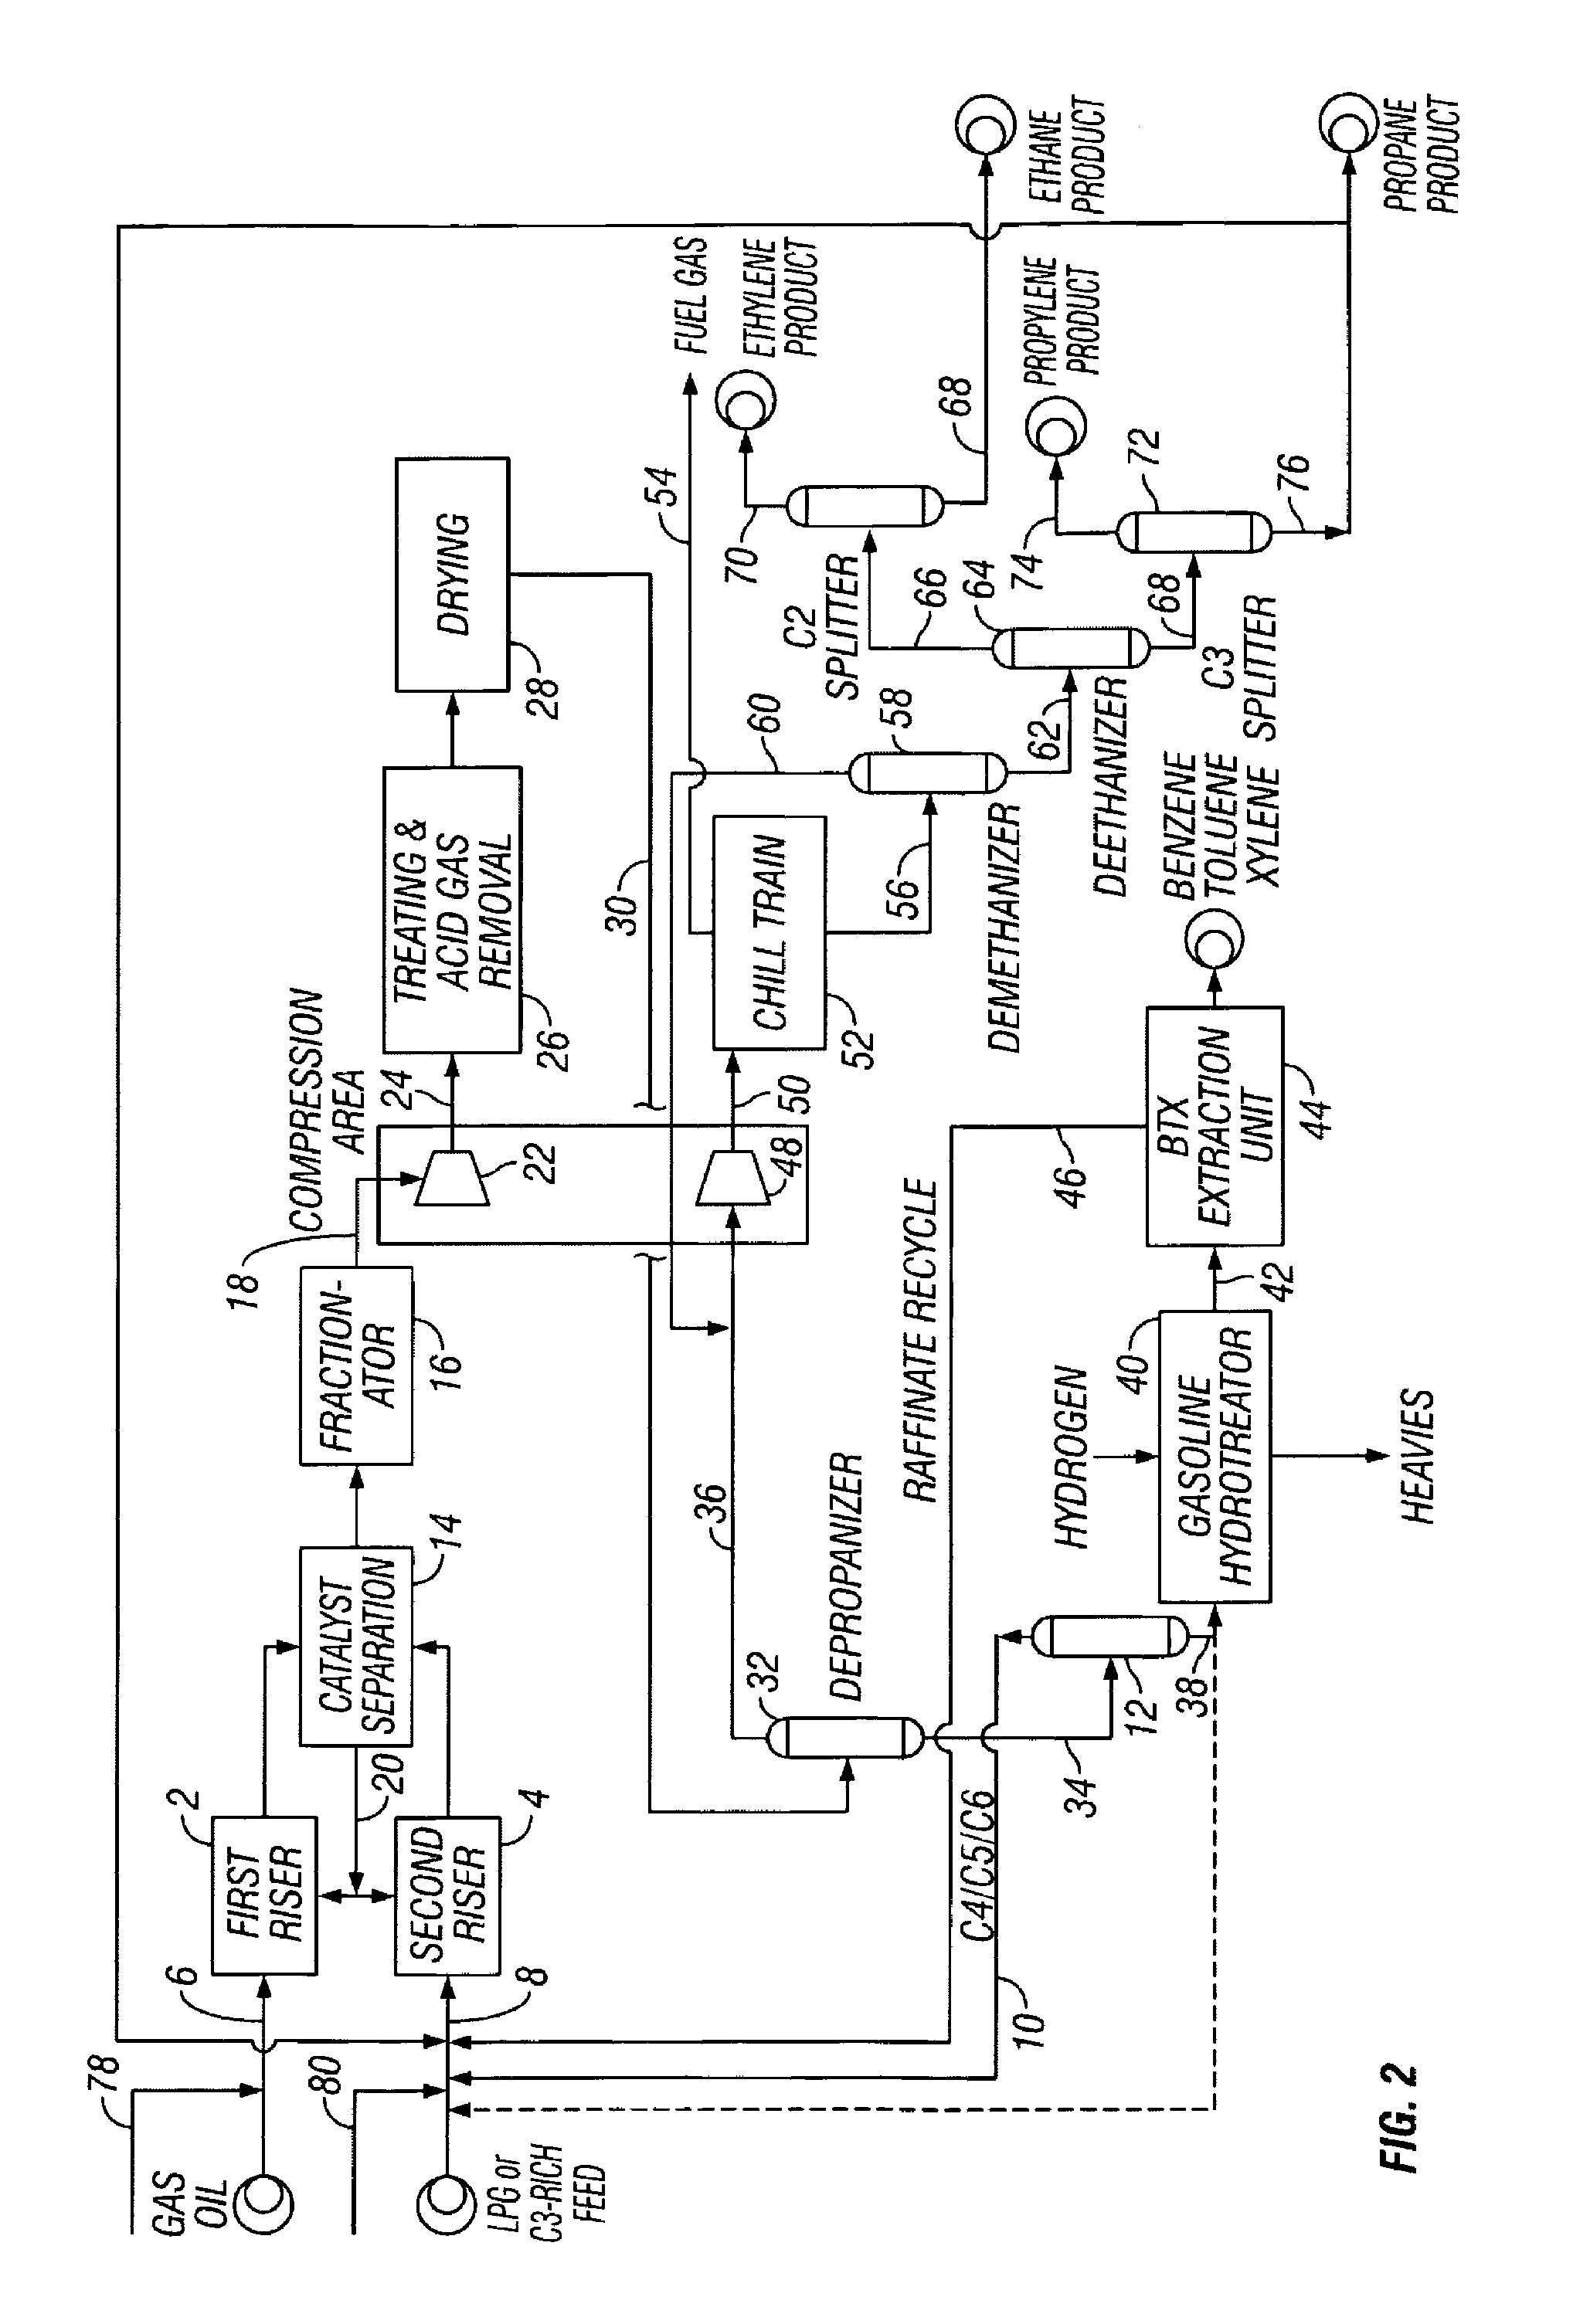 FCC process for converting C3/C4 feeds to olefins and aromatics